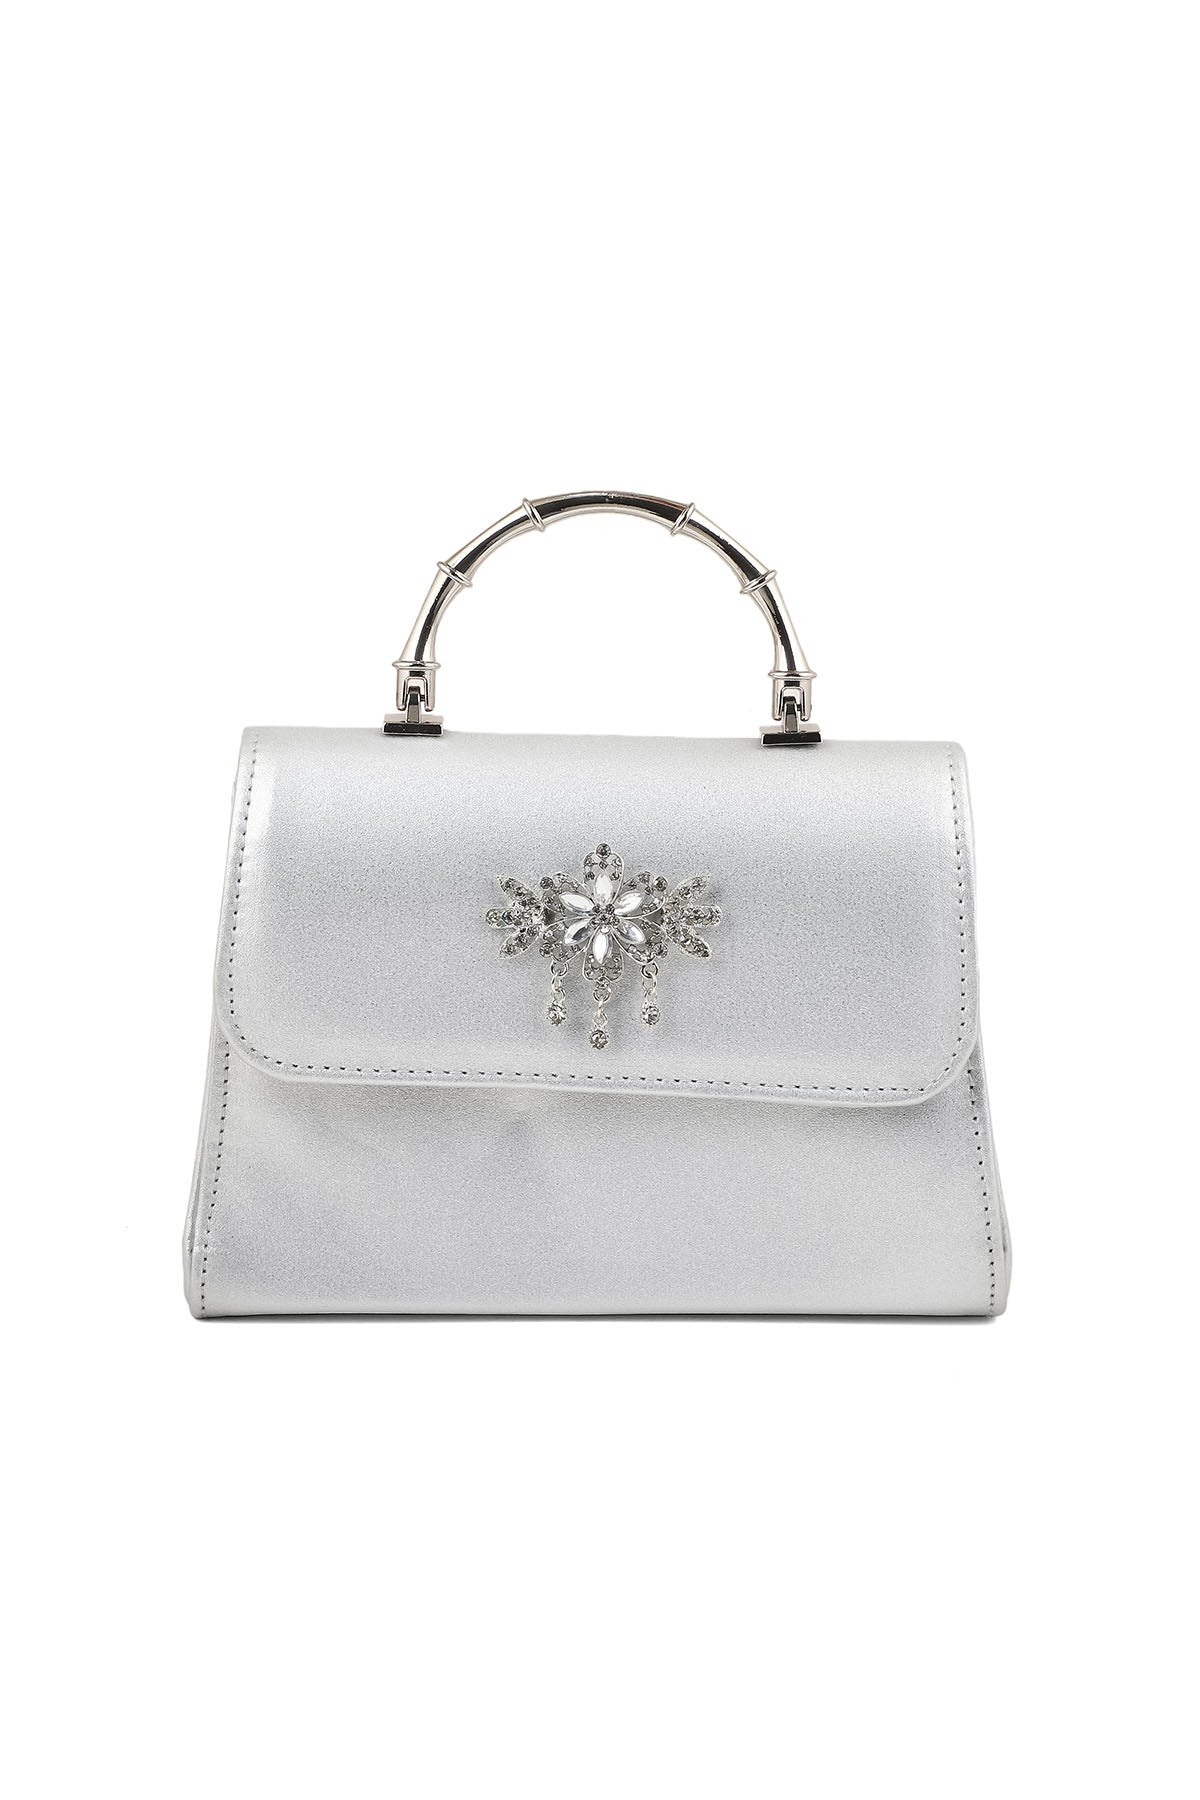 Top Handle Hand Bags B21591-Silver